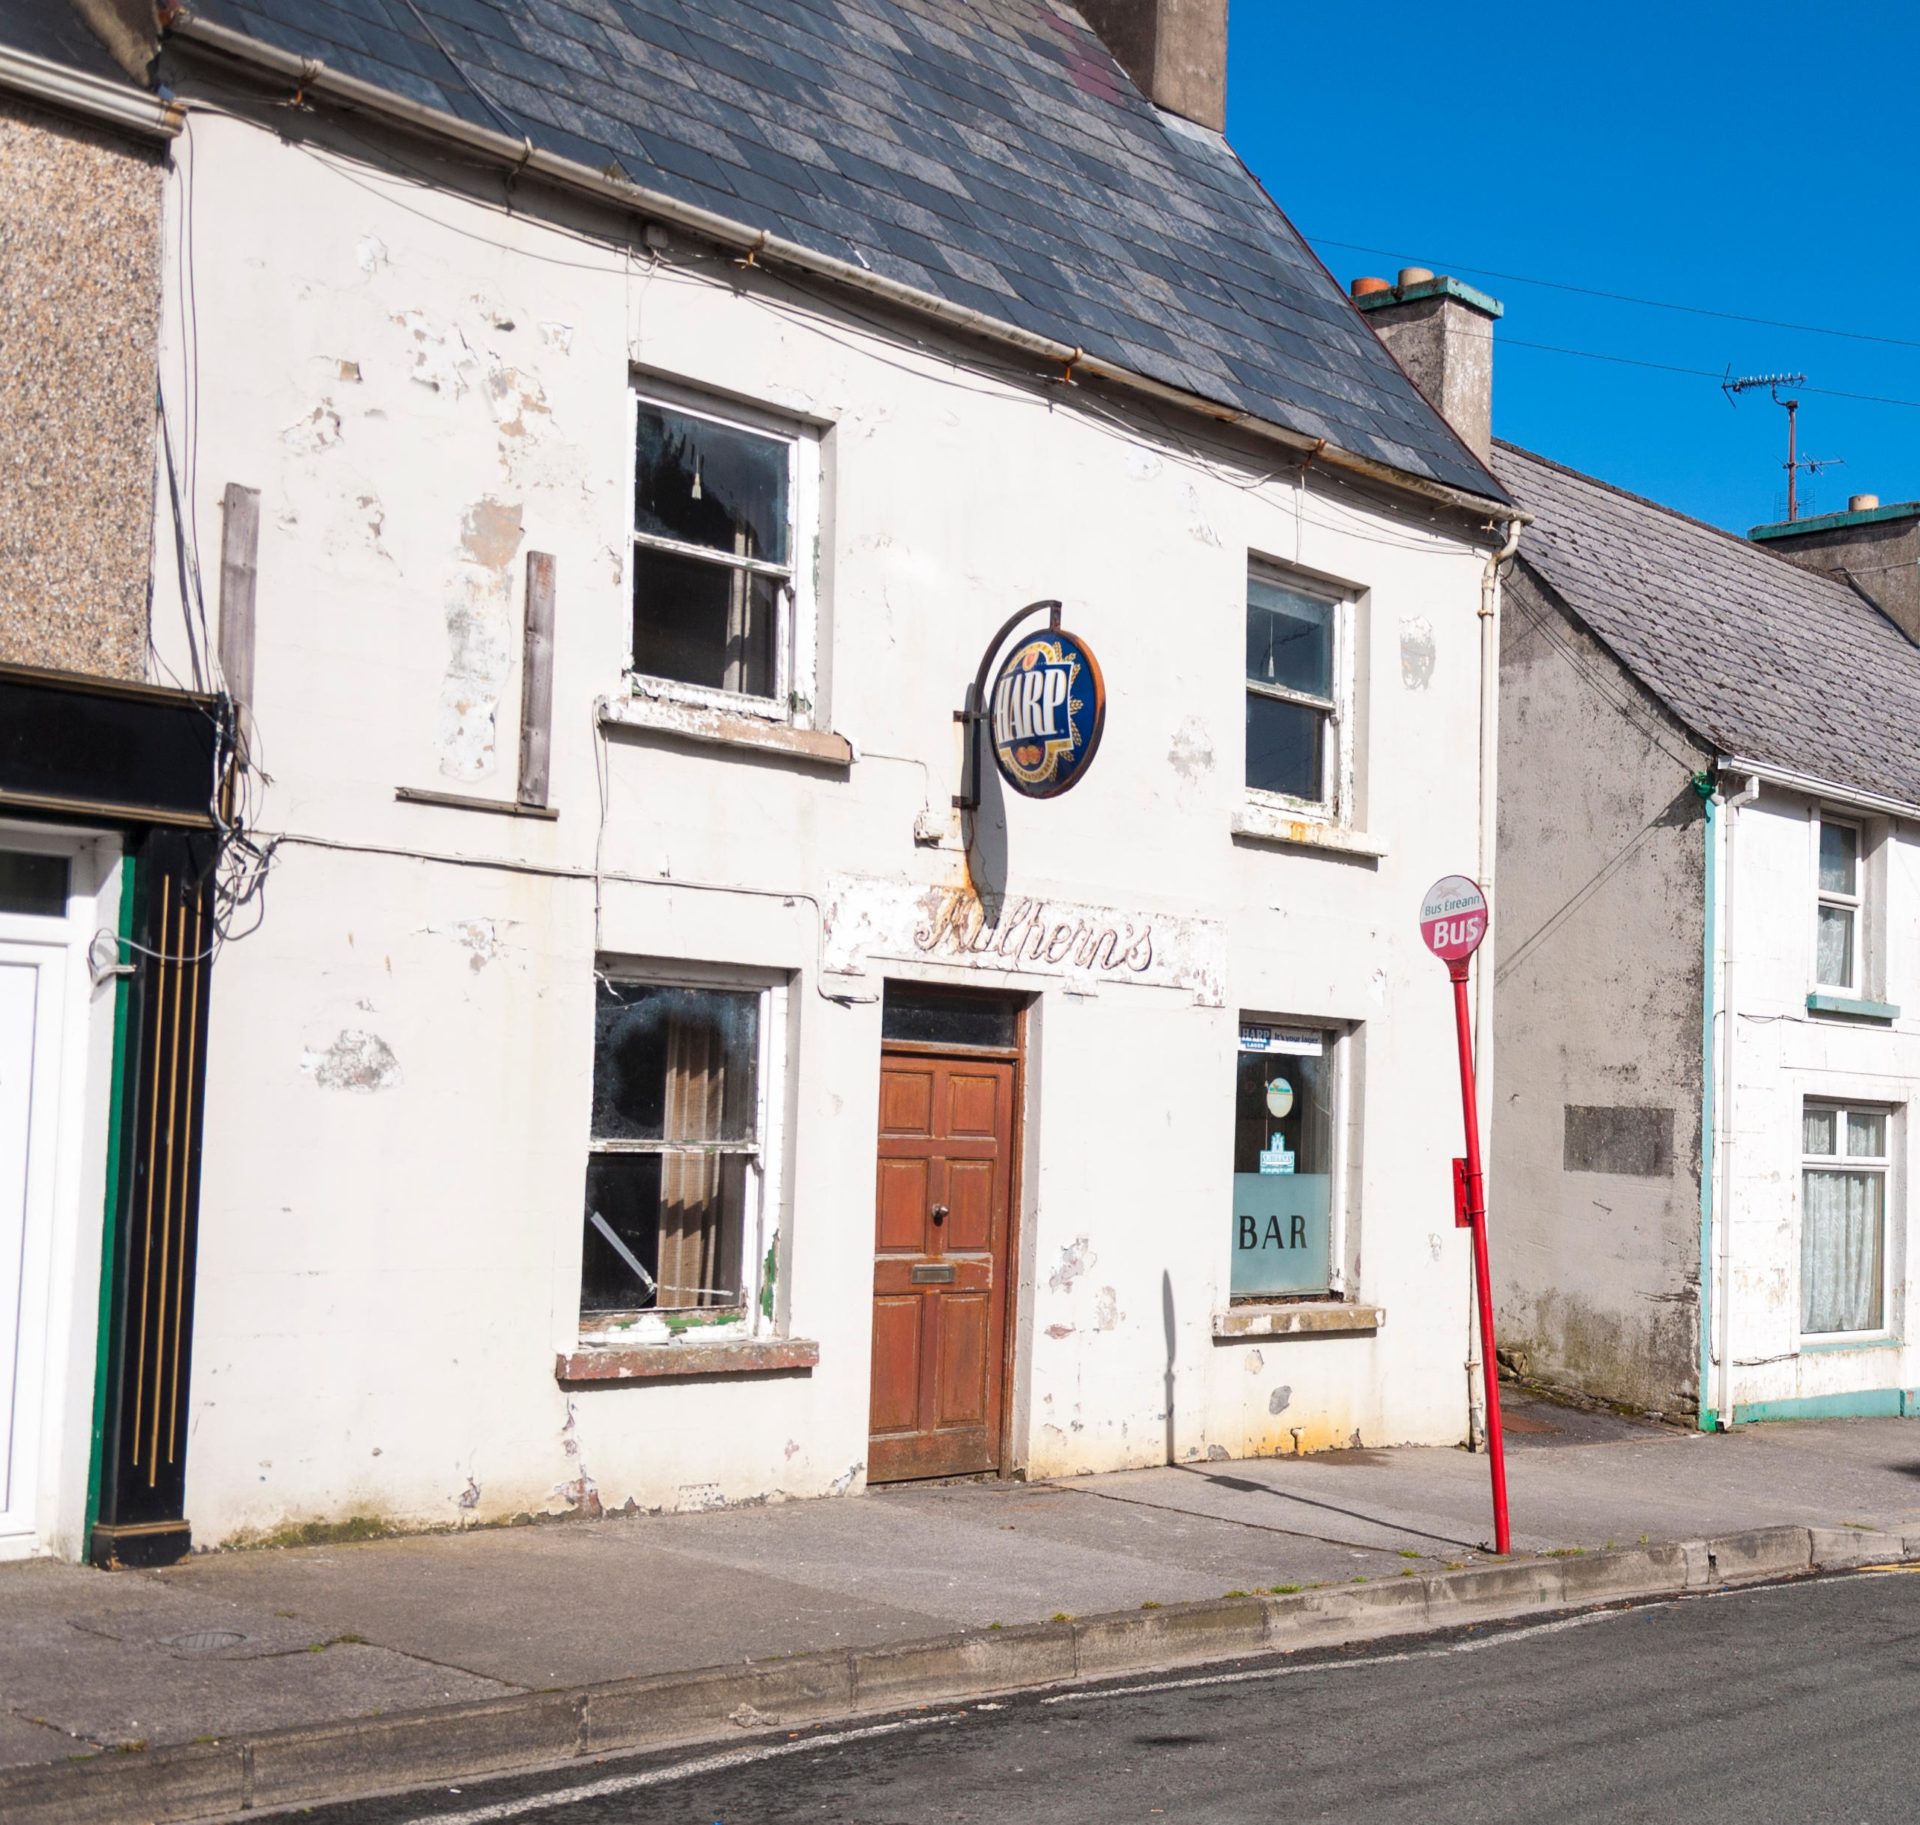 A closed bar is seen on Main Street in Mountcharles, Co Donegal in April 2016